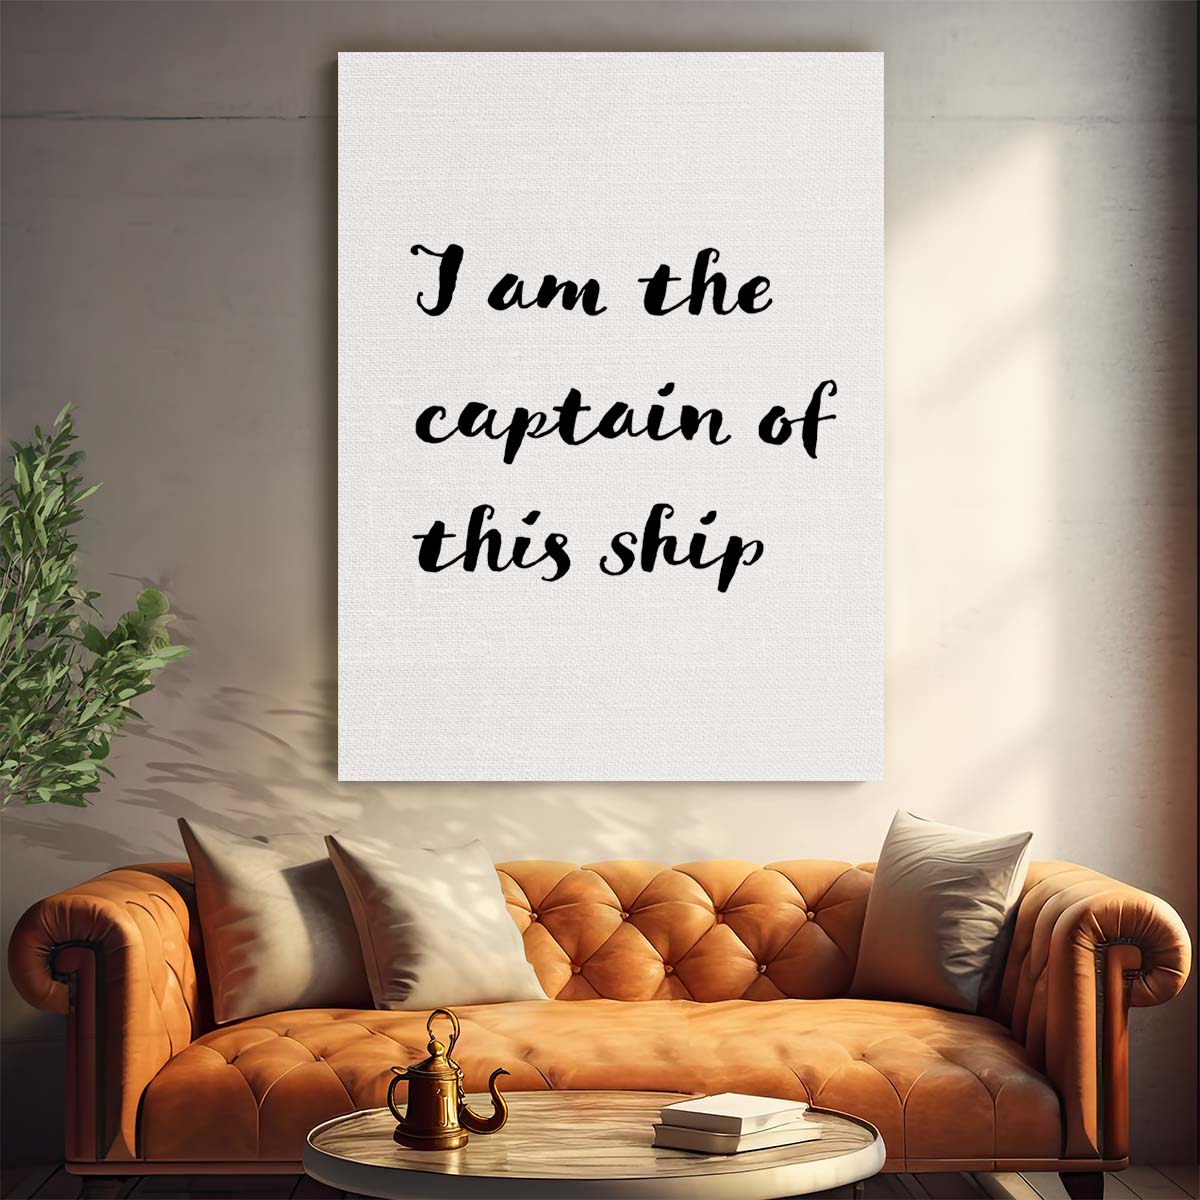 Monochrome Ship Captain Motivational Quote Illustration Art by Luxuriance Designs, made in USA